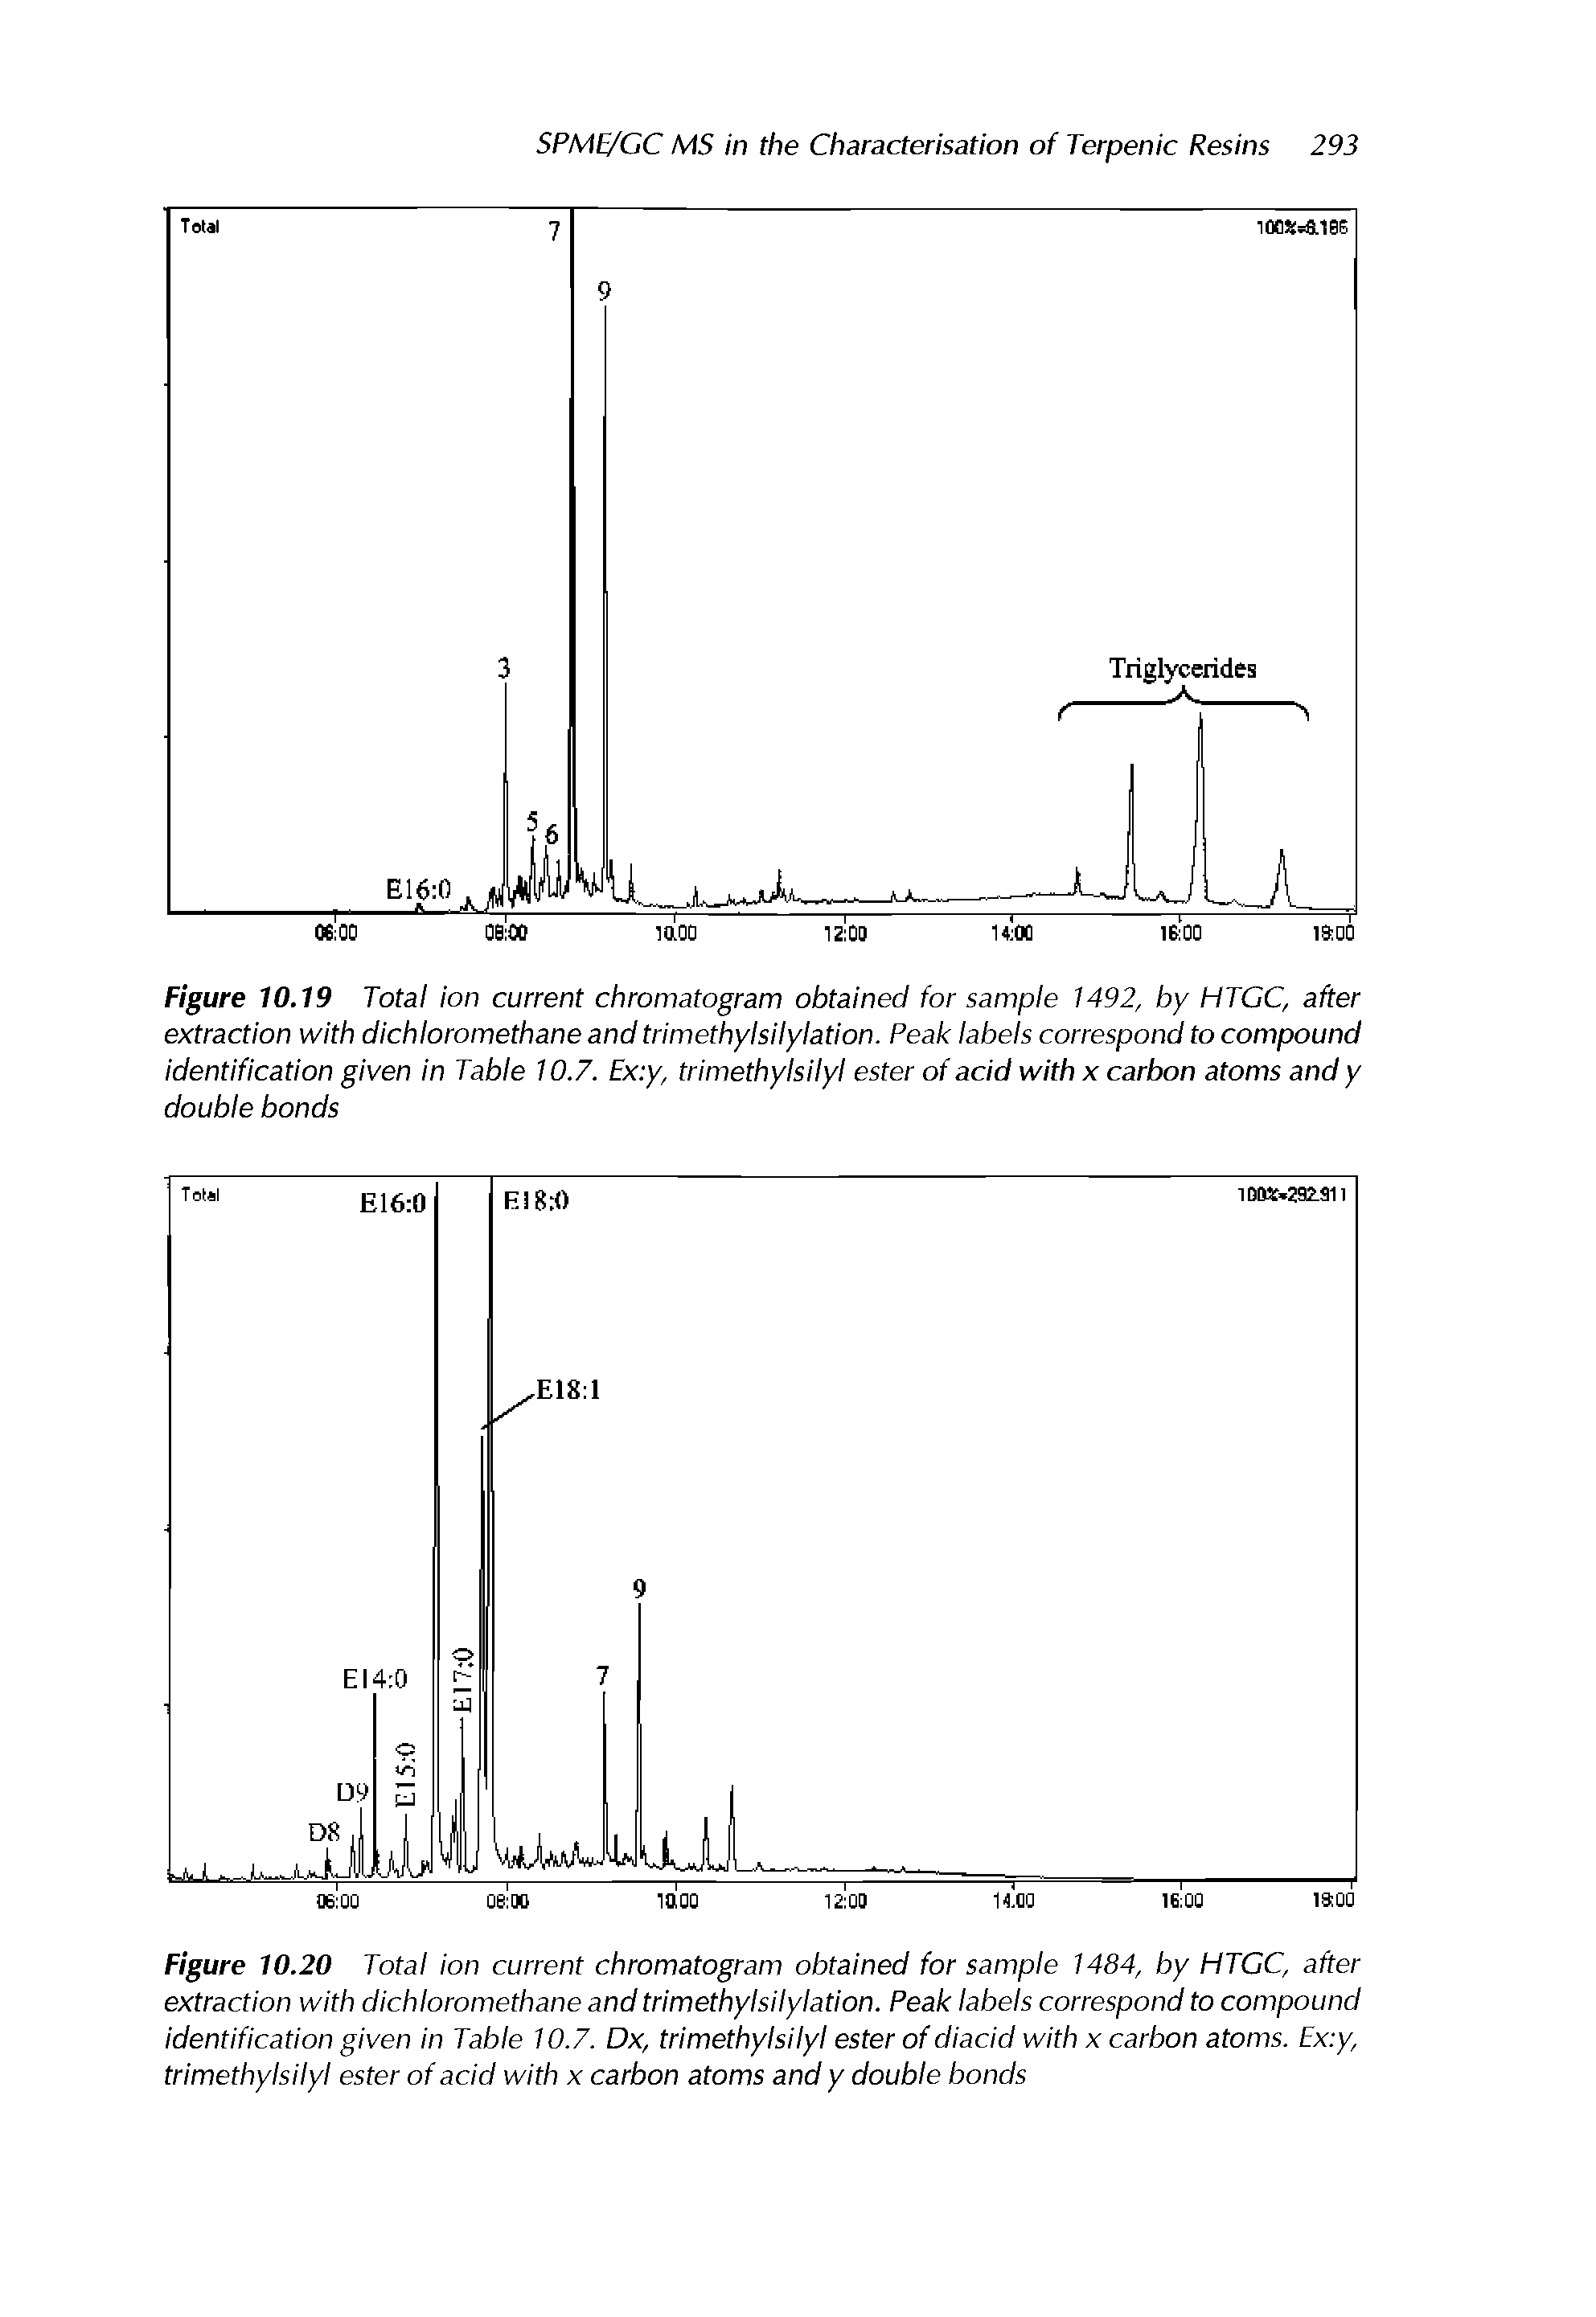 Figure 10.20 Total ion current chromatogram obtained for sample 1484, by HTGC, after extraction with dichloromethane and trimethylsilylation. Peak labels correspond to compound identification given in Table 10.7. Dx, trimethylsilyl ester of diacid with x carbon atoms. Ex y, trimethylsilyl ester of acid with x carbon atoms and y double bonds...